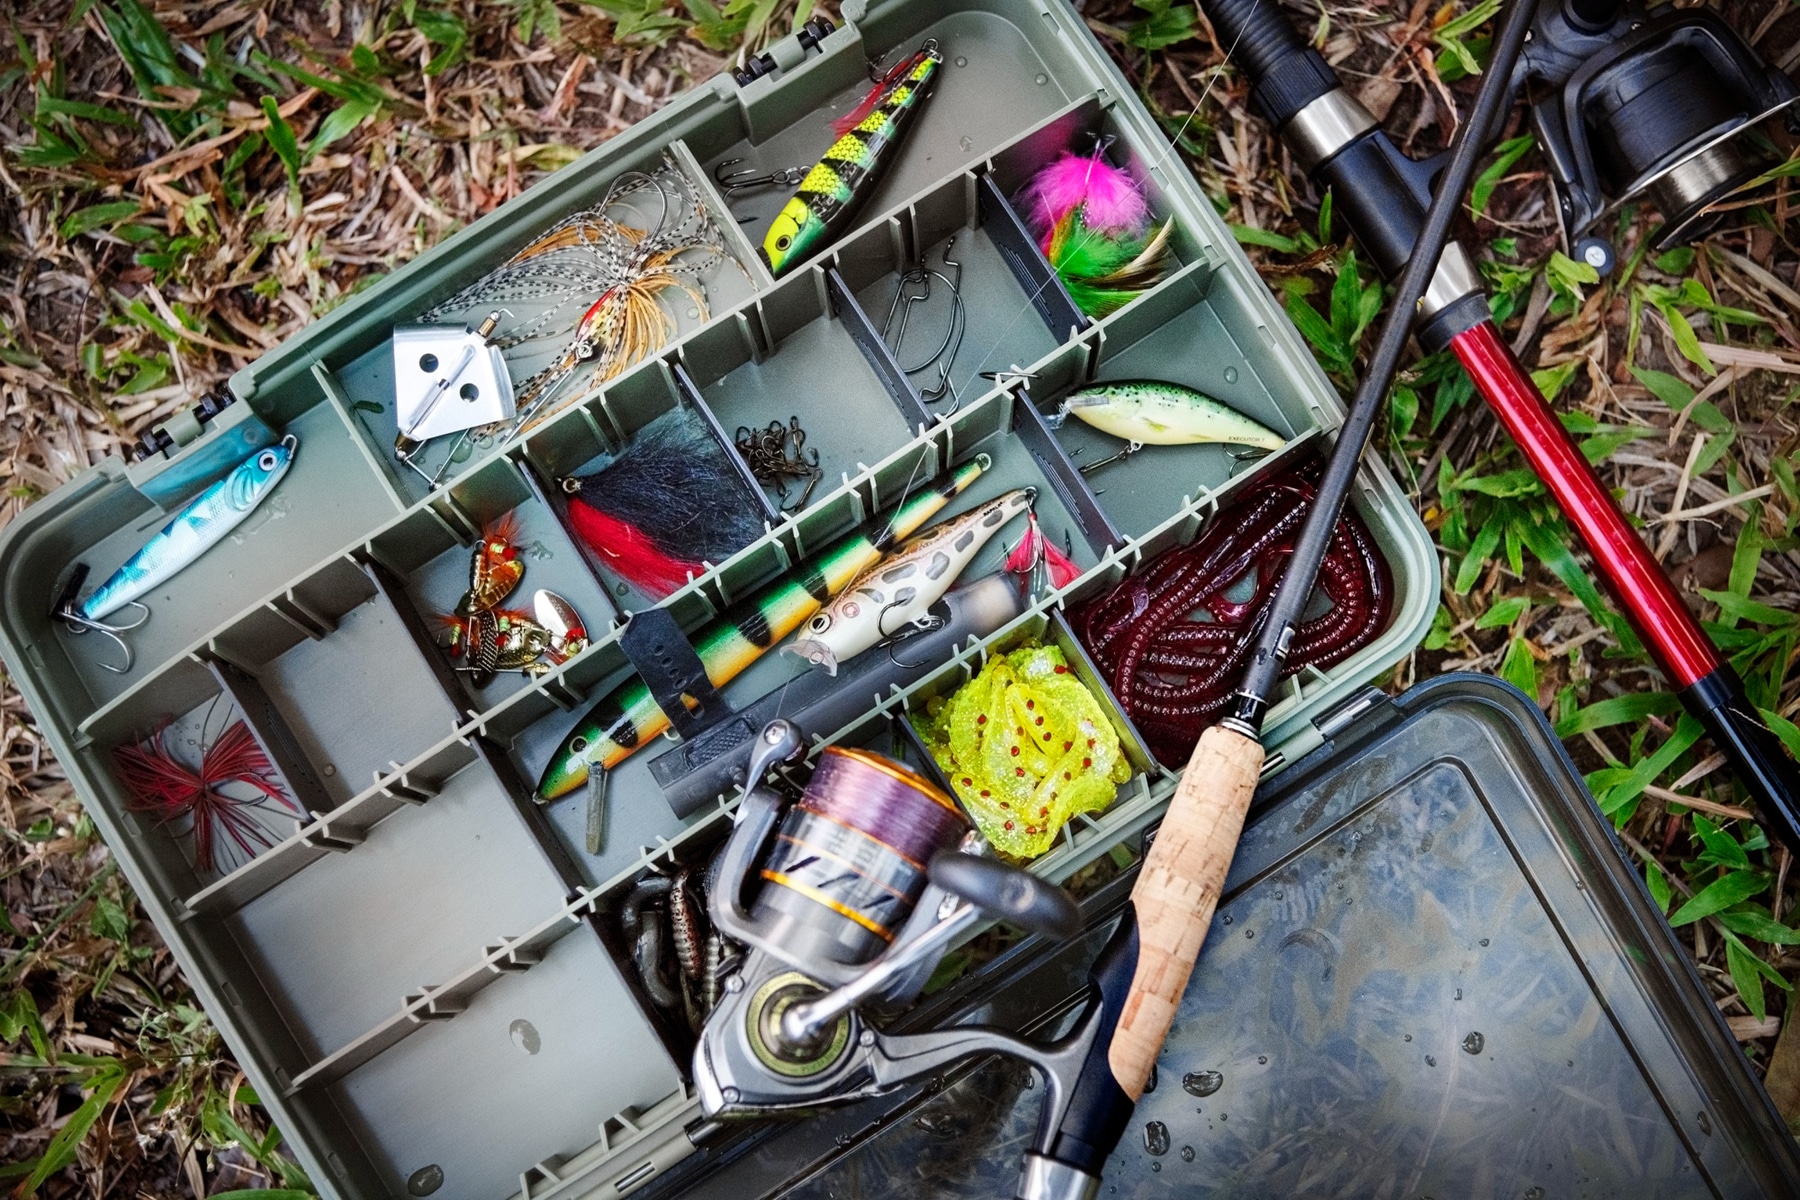 This is the cover photo for our Best Tackle Box article. It features a tackle box on the ground with fishing lures and assorted accessories inside.